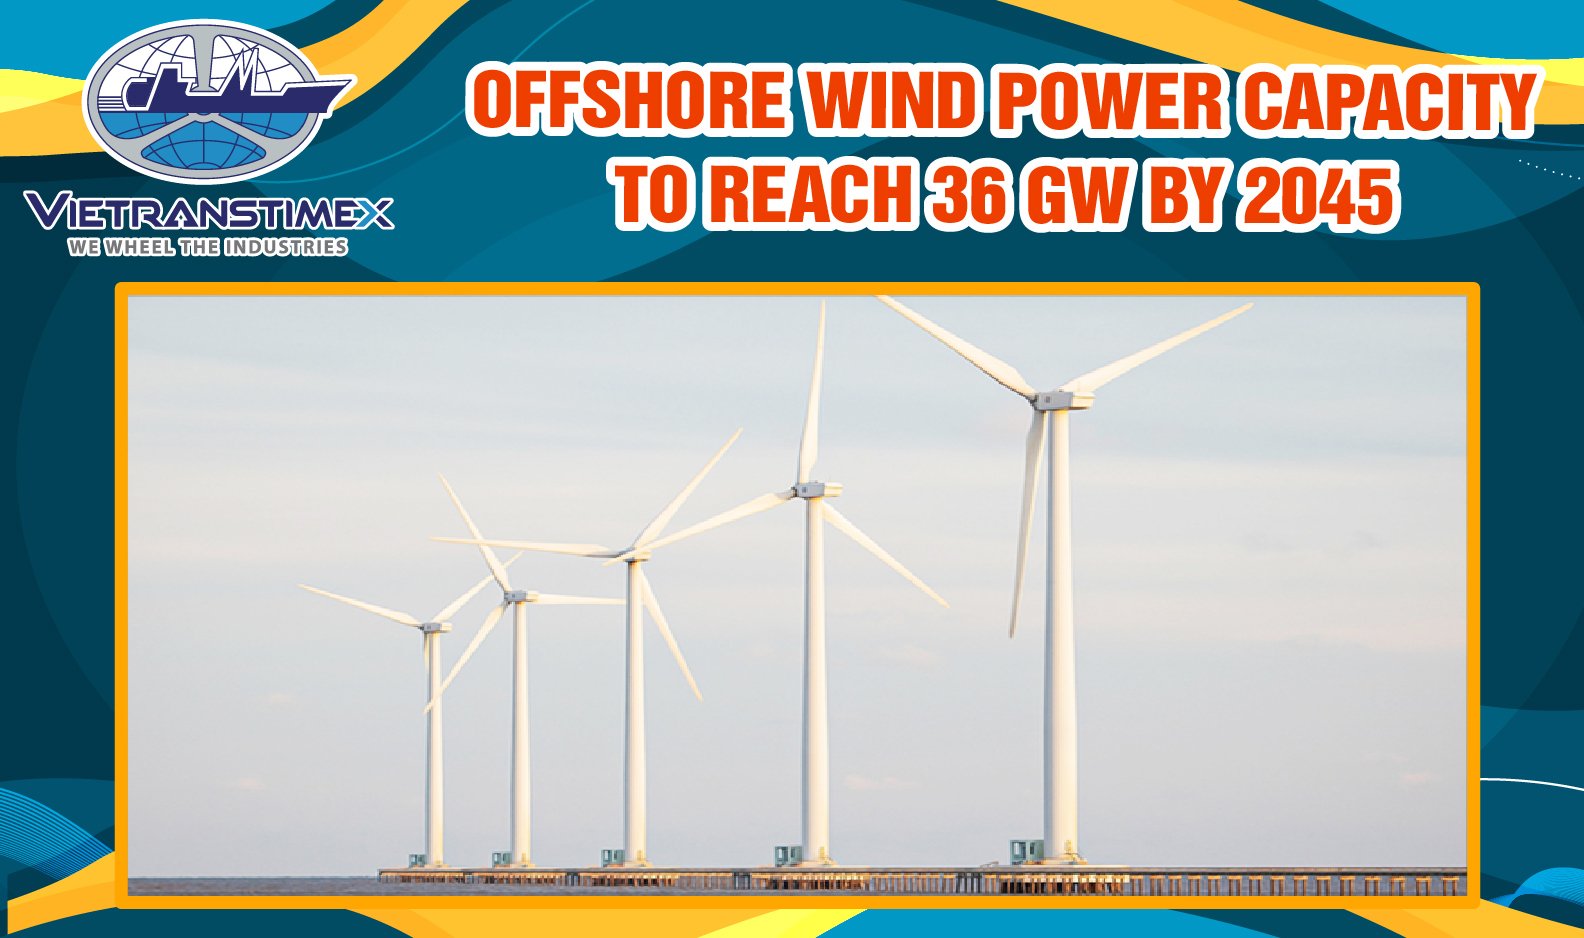 Offshore Wind Power Capacity To Reach 36 GW By 2045